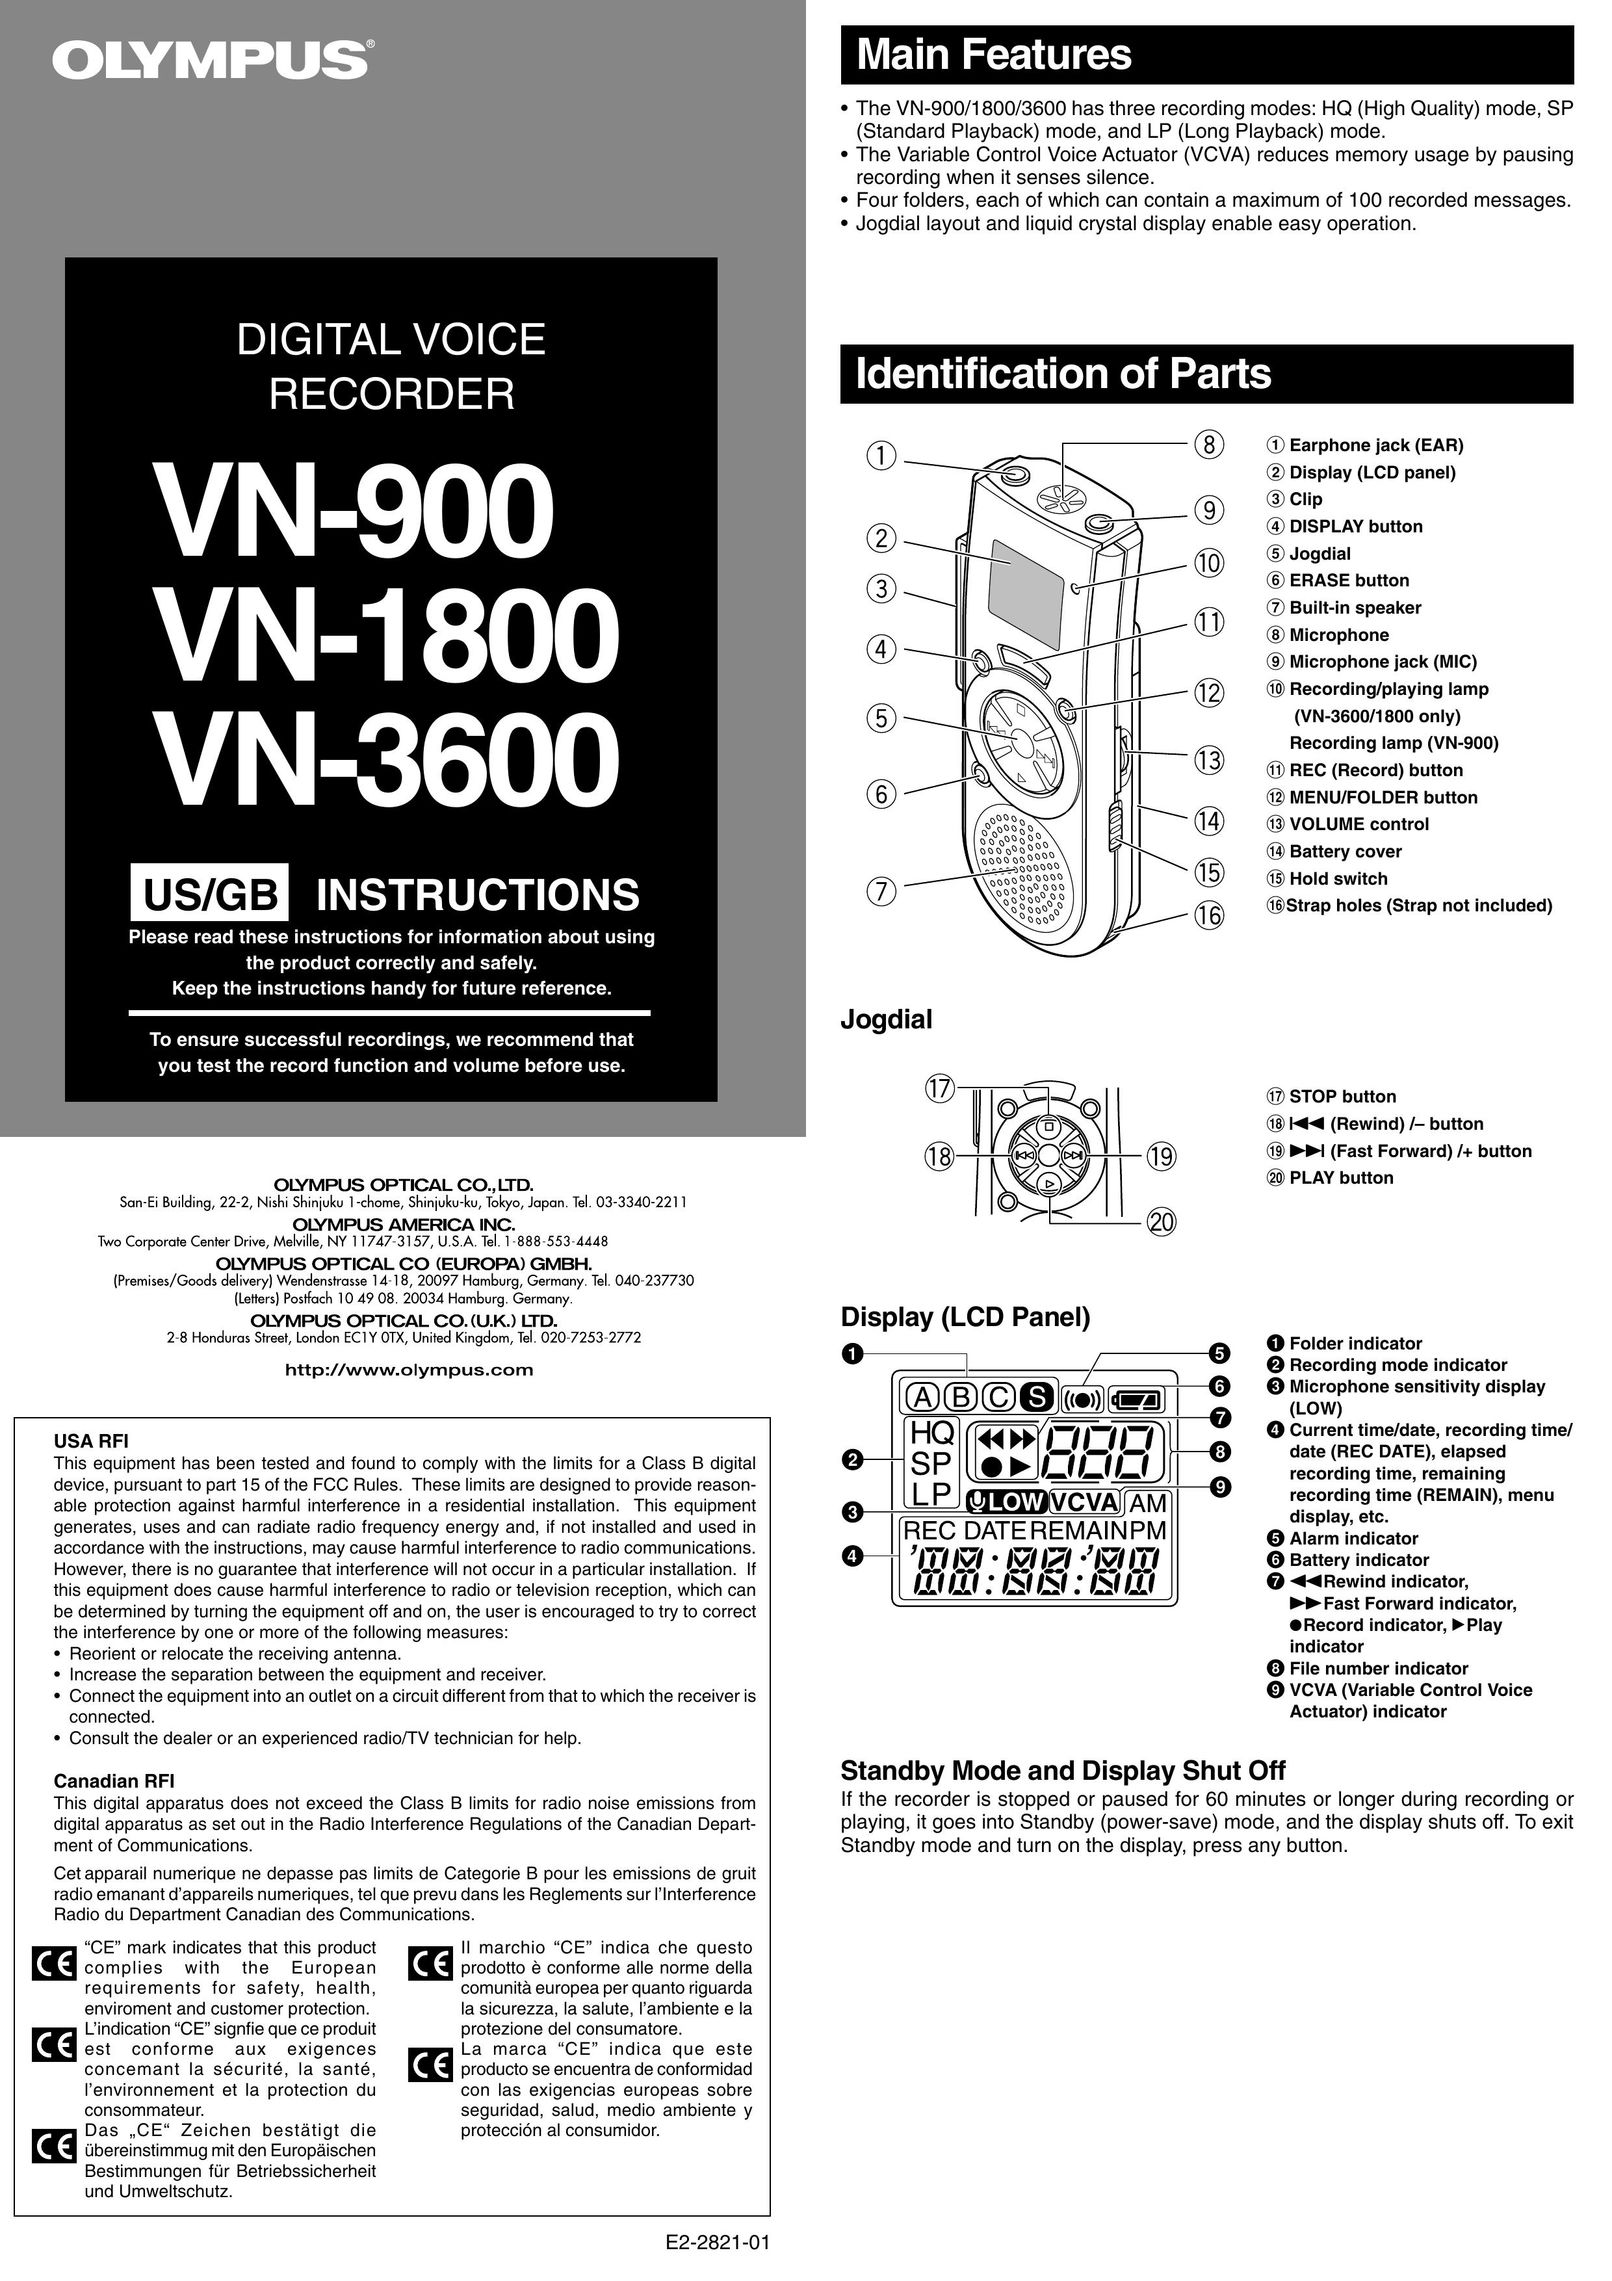 Olympus VN-3600 Double Oven User Manual